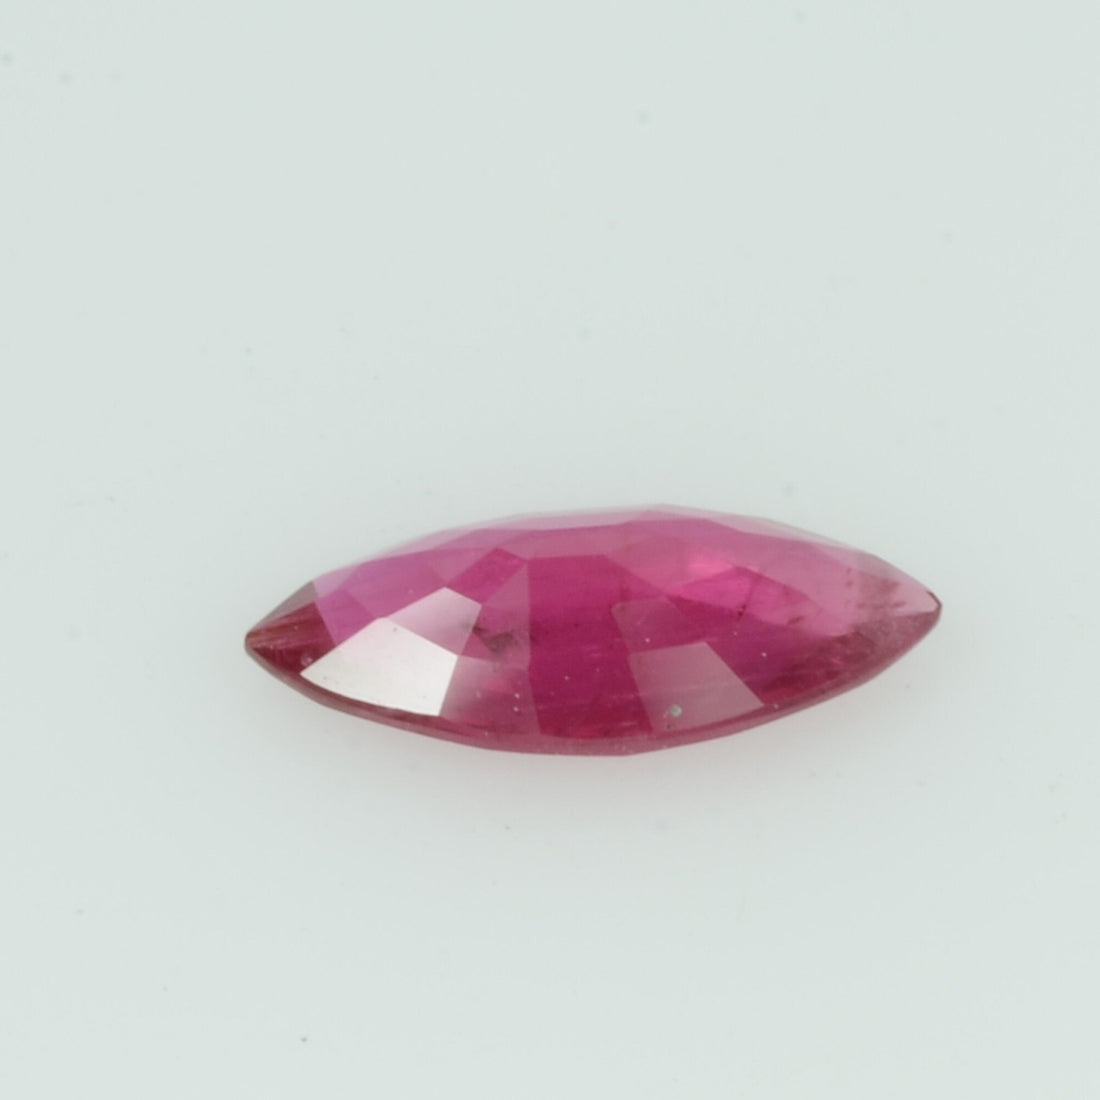 0.39 cts Natural Vietnam Ruby Loose Gemstone Marquise Cut